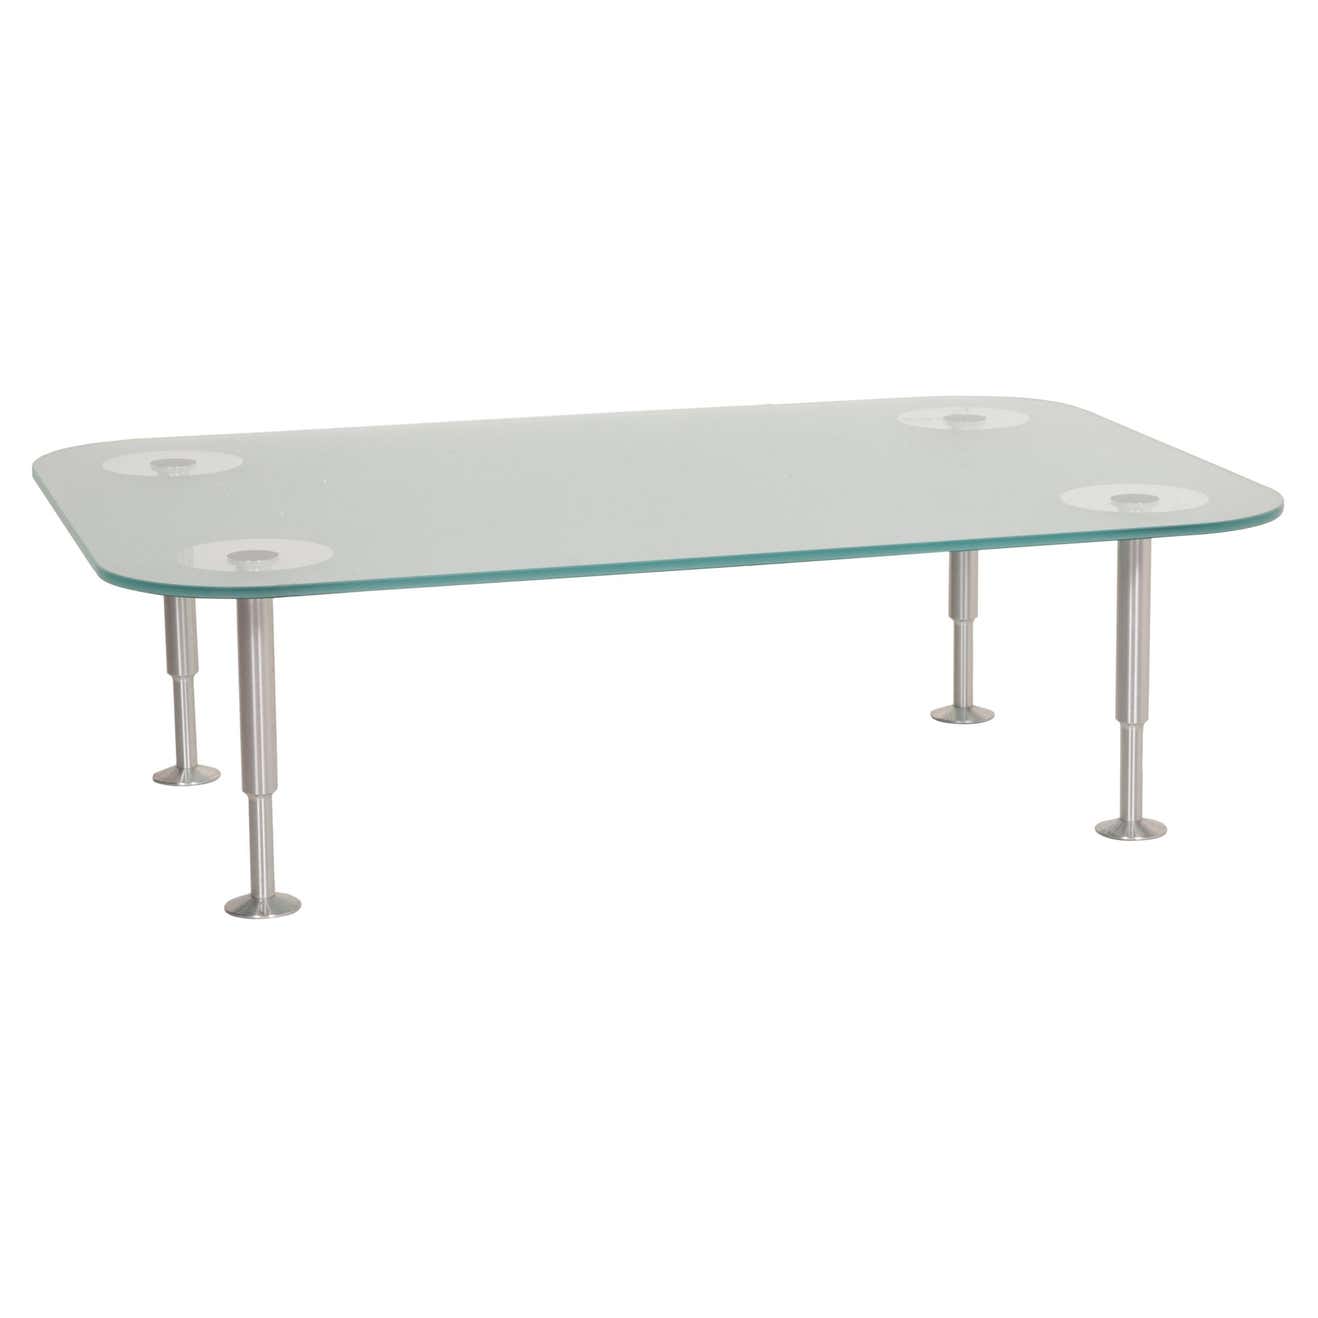 Rolf Benz Glass Table, Coffee Table, Chrome Frosted Glass For Sale at ...